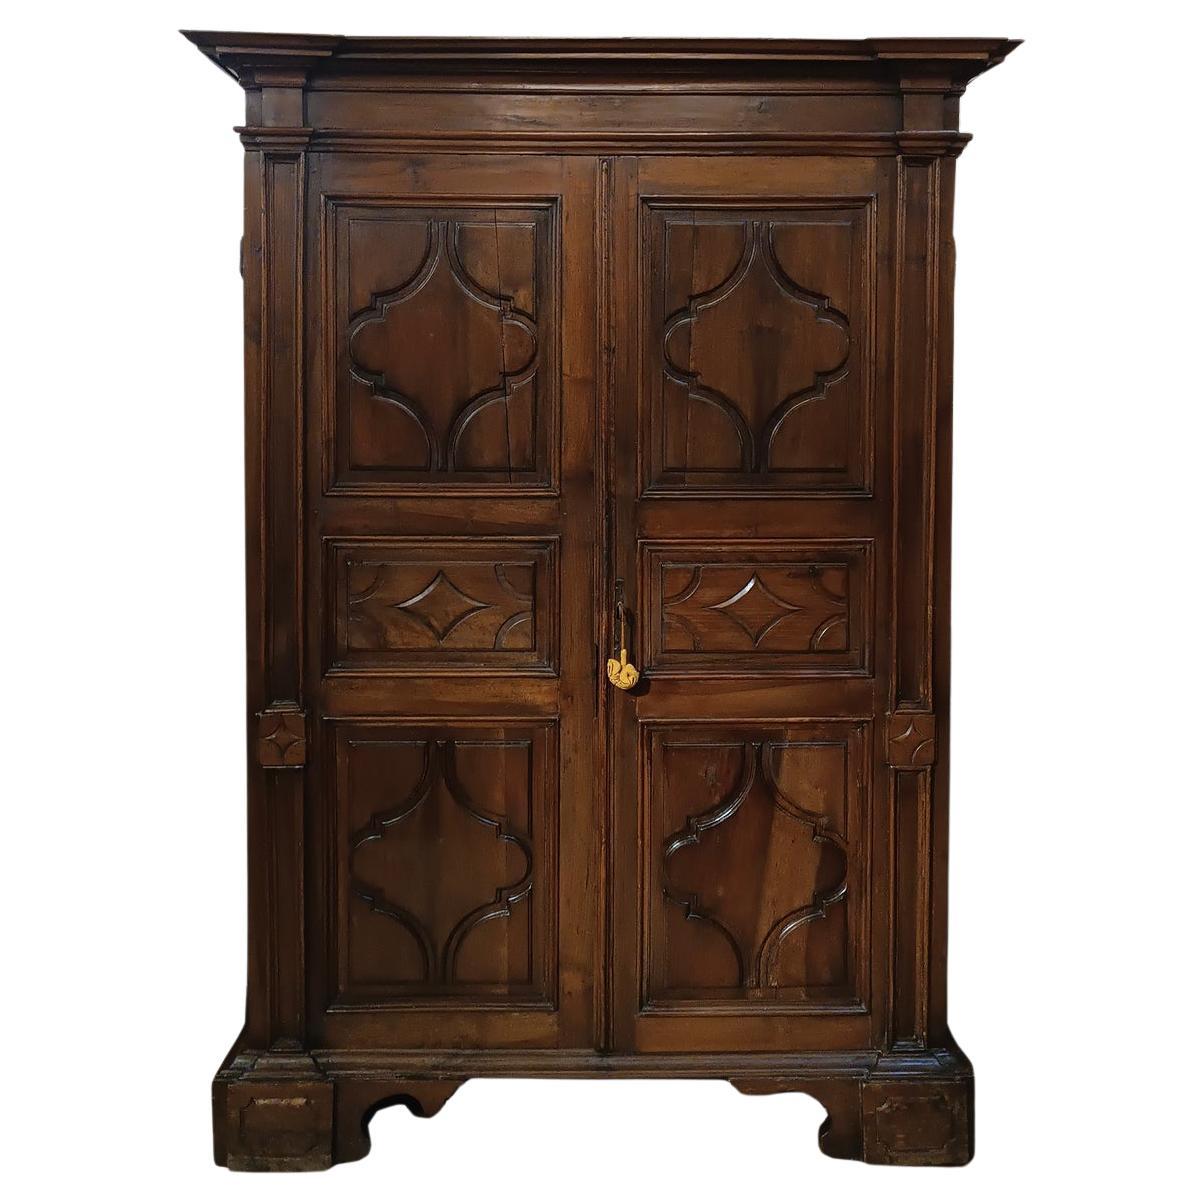 END OF THE 17th CENTURY LOUIS XIV WARDROBE IN SOLID WALNUT For Sale